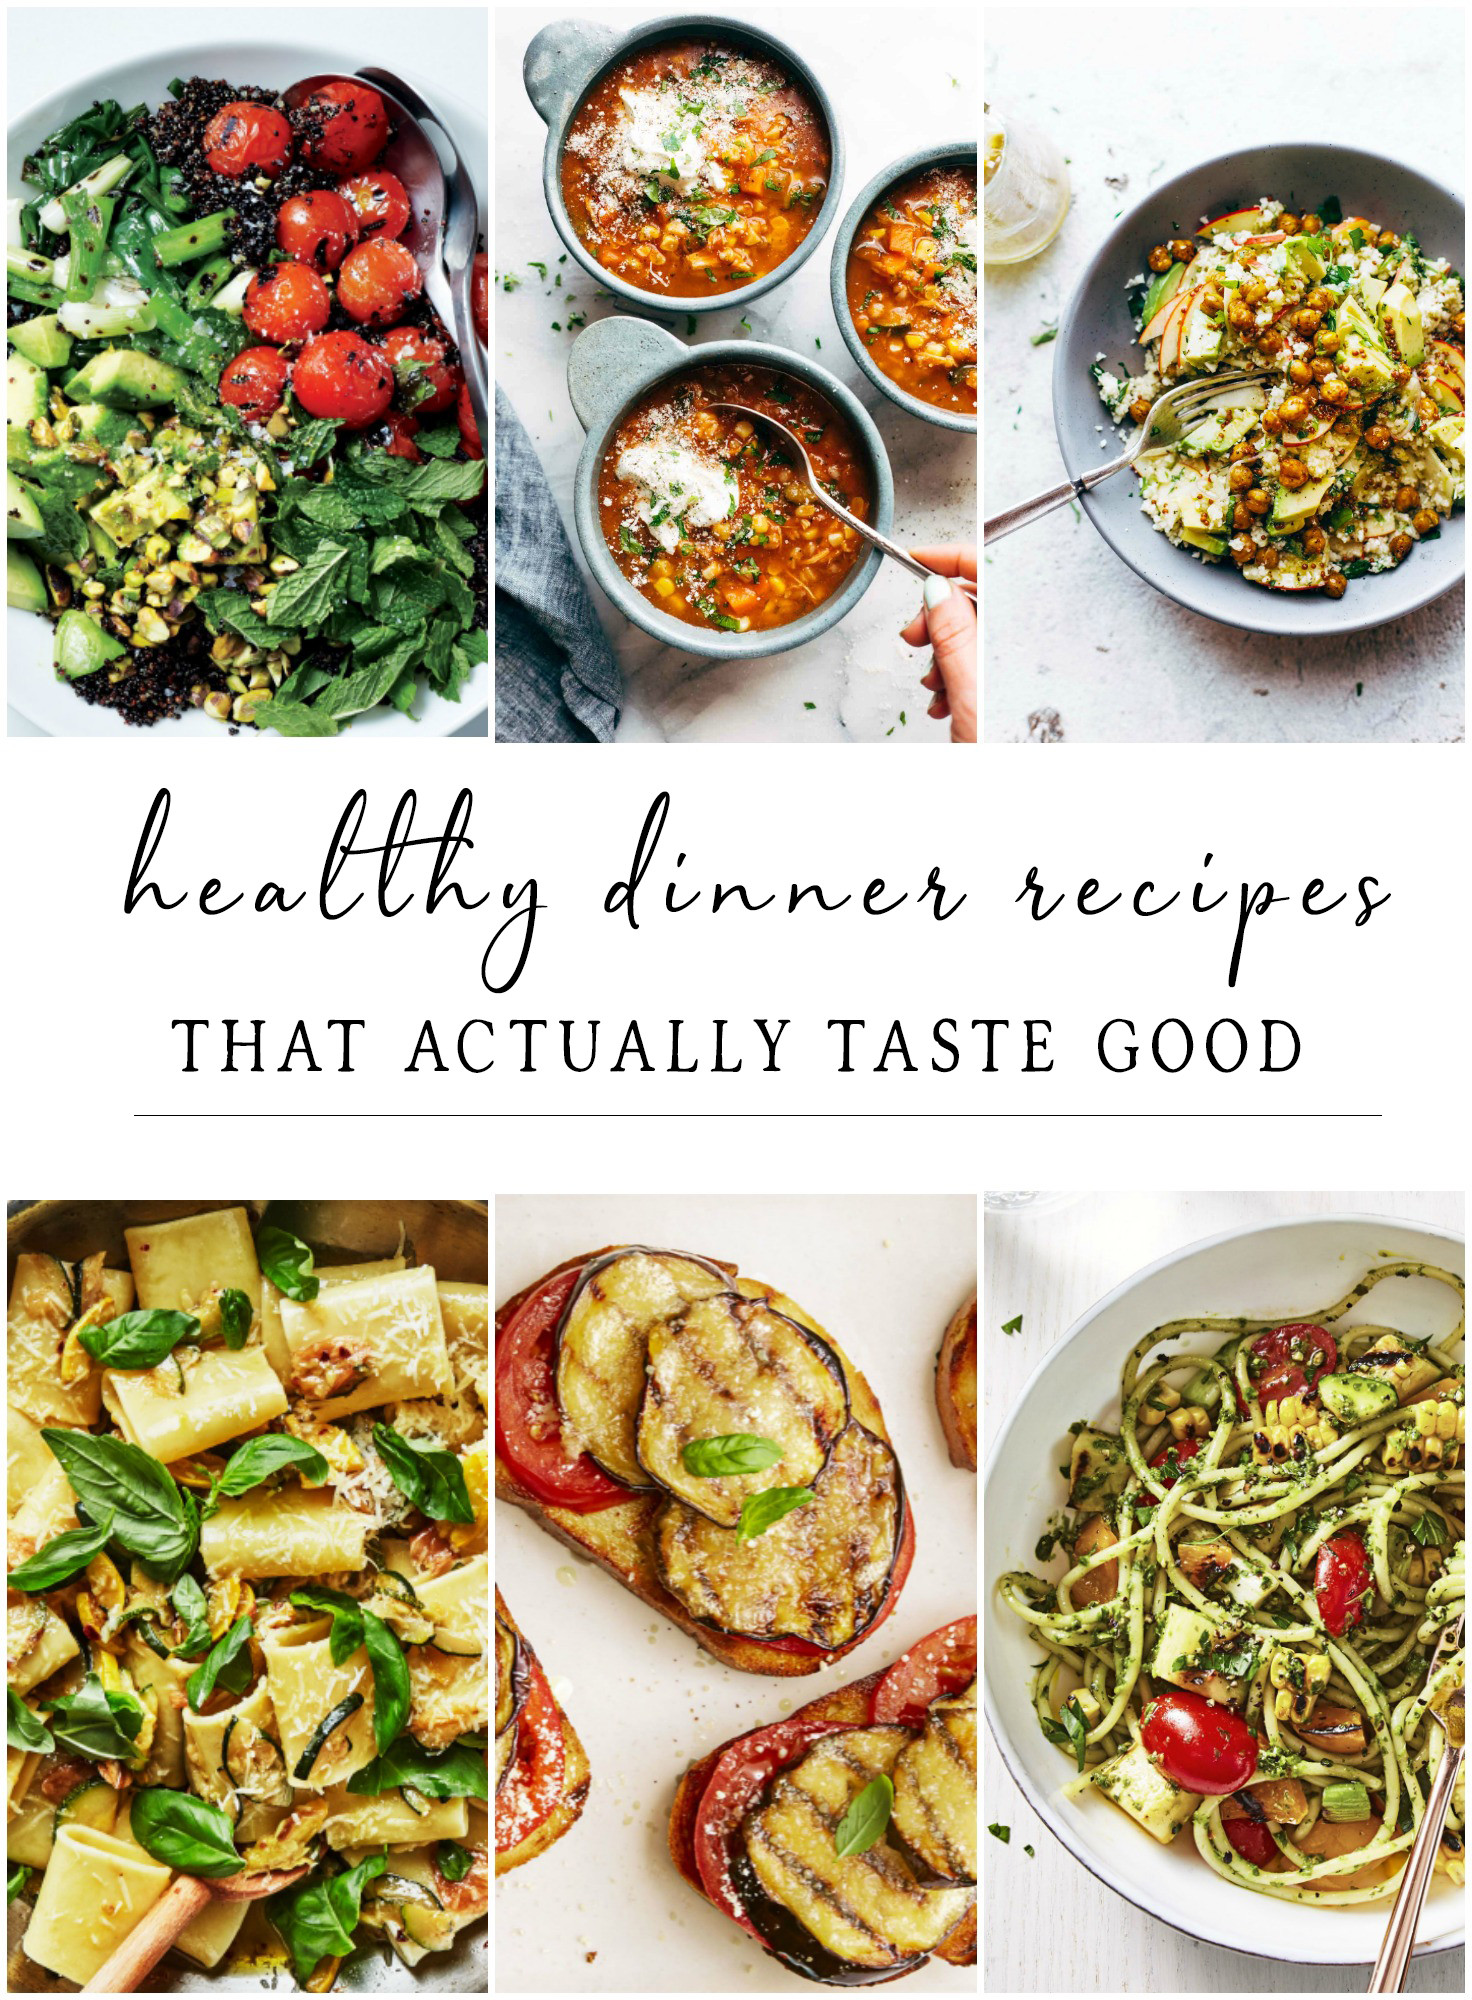 Healthy Dinners that Taste Good 20 Of the Best Ideas for Healthy Dinner Recipes